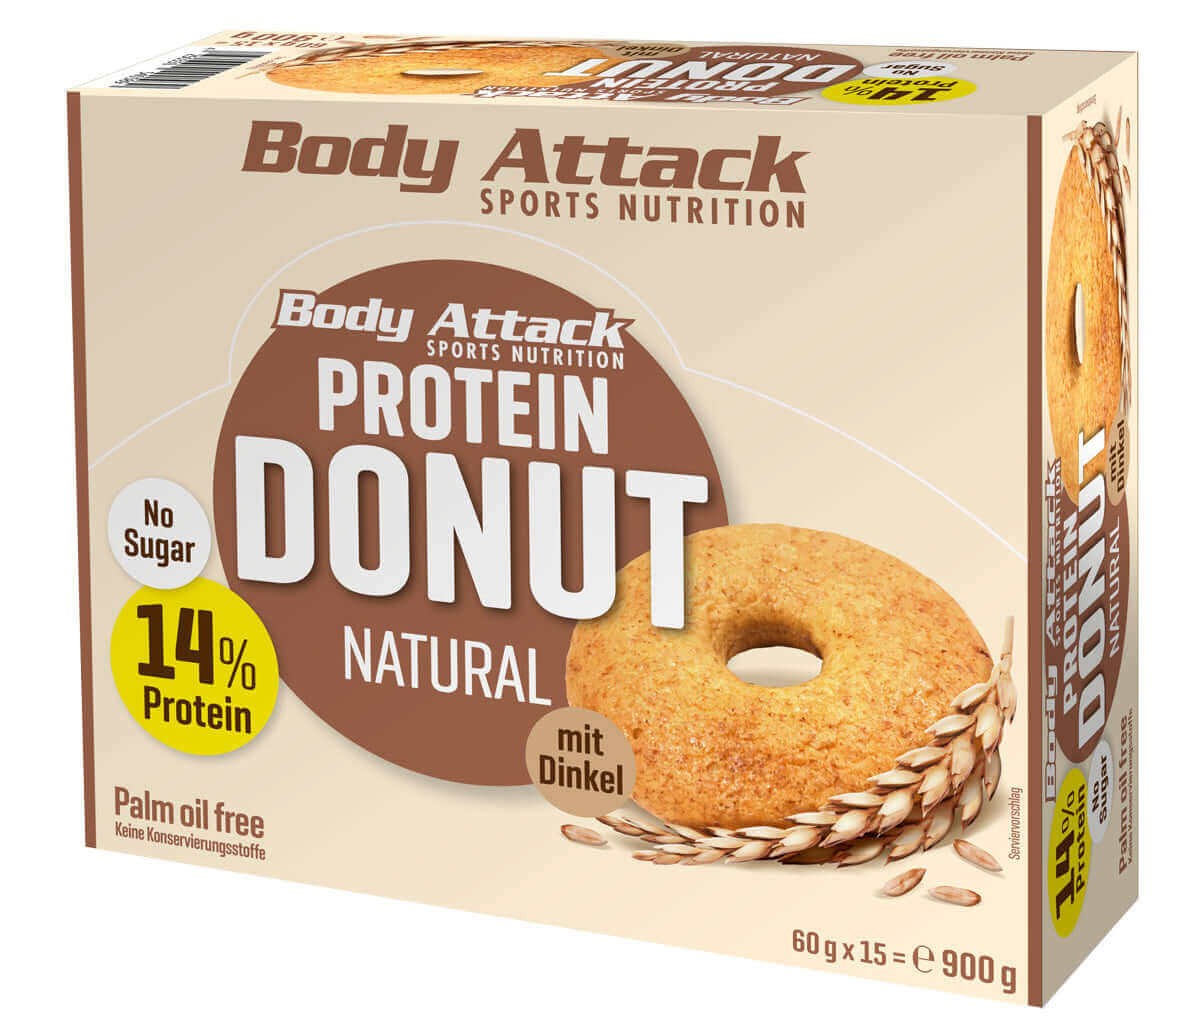 Protein donut 60g Nature Body Attack Sports Nutrition